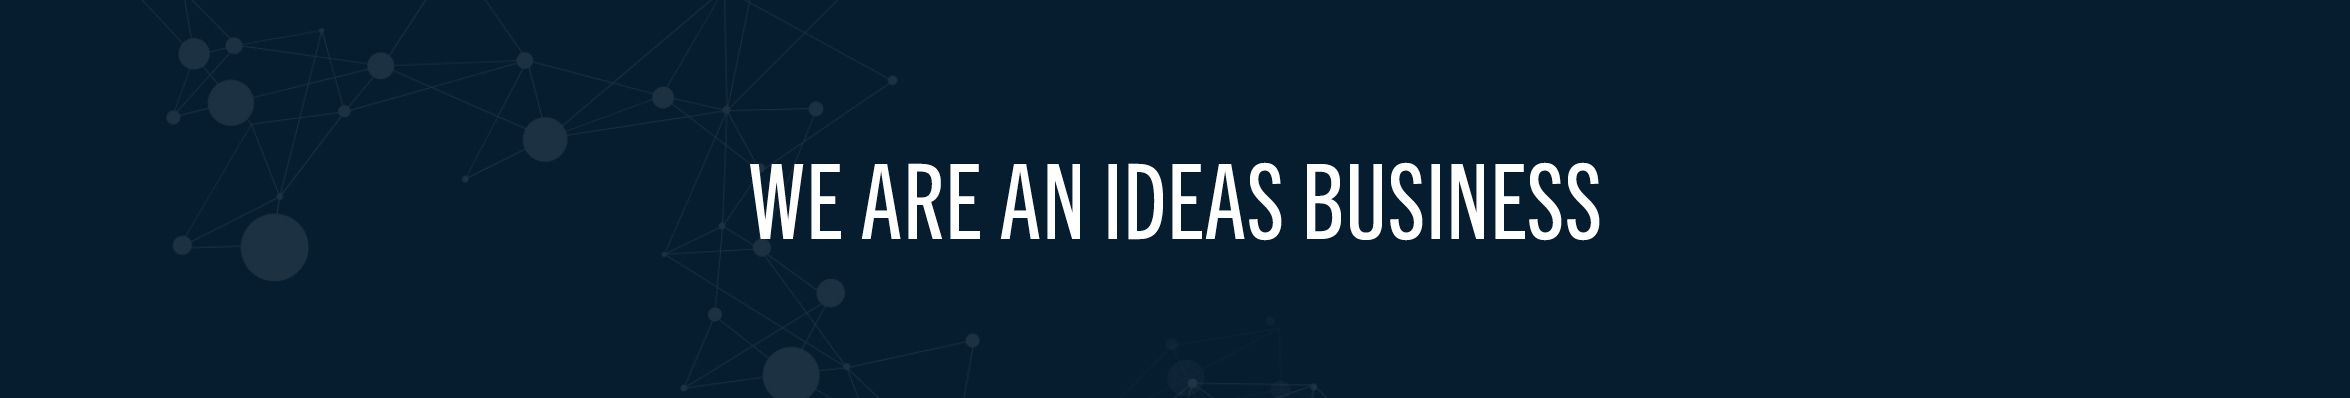 Light text on a dark background that says "We are an ideas business"